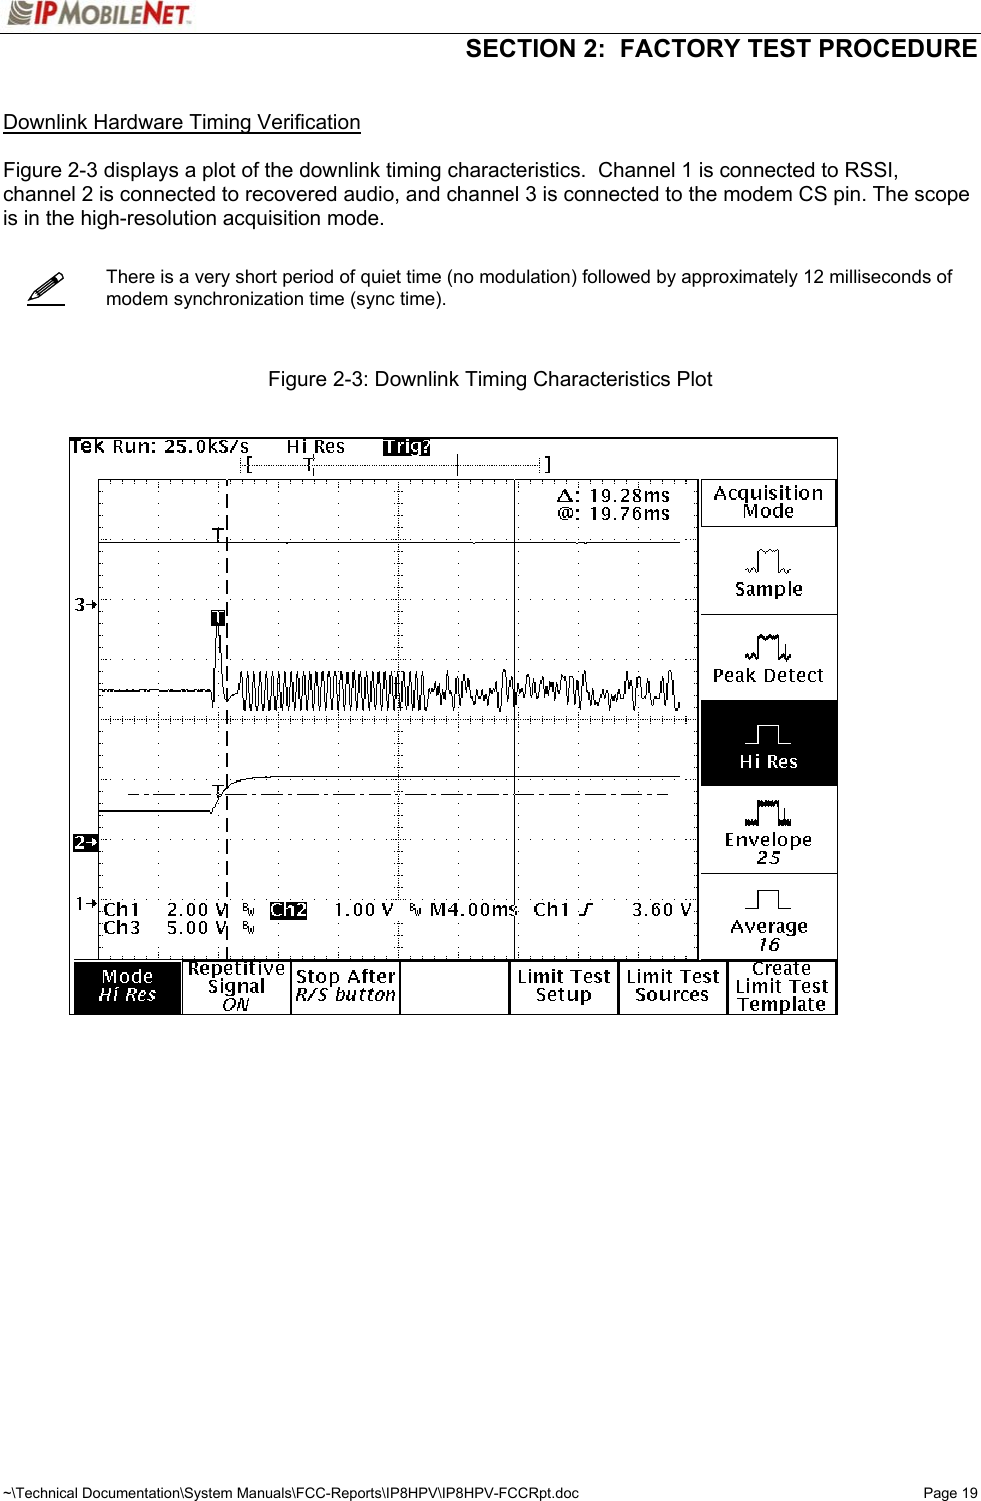   SECTION 2:  FACTORY TEST PROCEDURE  ~\Technical Documentation\System Manuals\FCC-Reports\IP8HPV\IP8HPV-FCCRpt.doc  Page 19    Downlink Hardware Timing Verification  Figure 2-3 displays a plot of the downlink timing characteristics.  Channel 1 is connected to RSSI, channel 2 is connected to recovered audio, and channel 3 is connected to the modem CS pin. The scope is in the high-resolution acquisition mode.      There is a very short period of quiet time (no modulation) followed by approximately 12 milliseconds of modem synchronization time (sync time).    Figure 2-3: Downlink Timing Characteristics Plot       